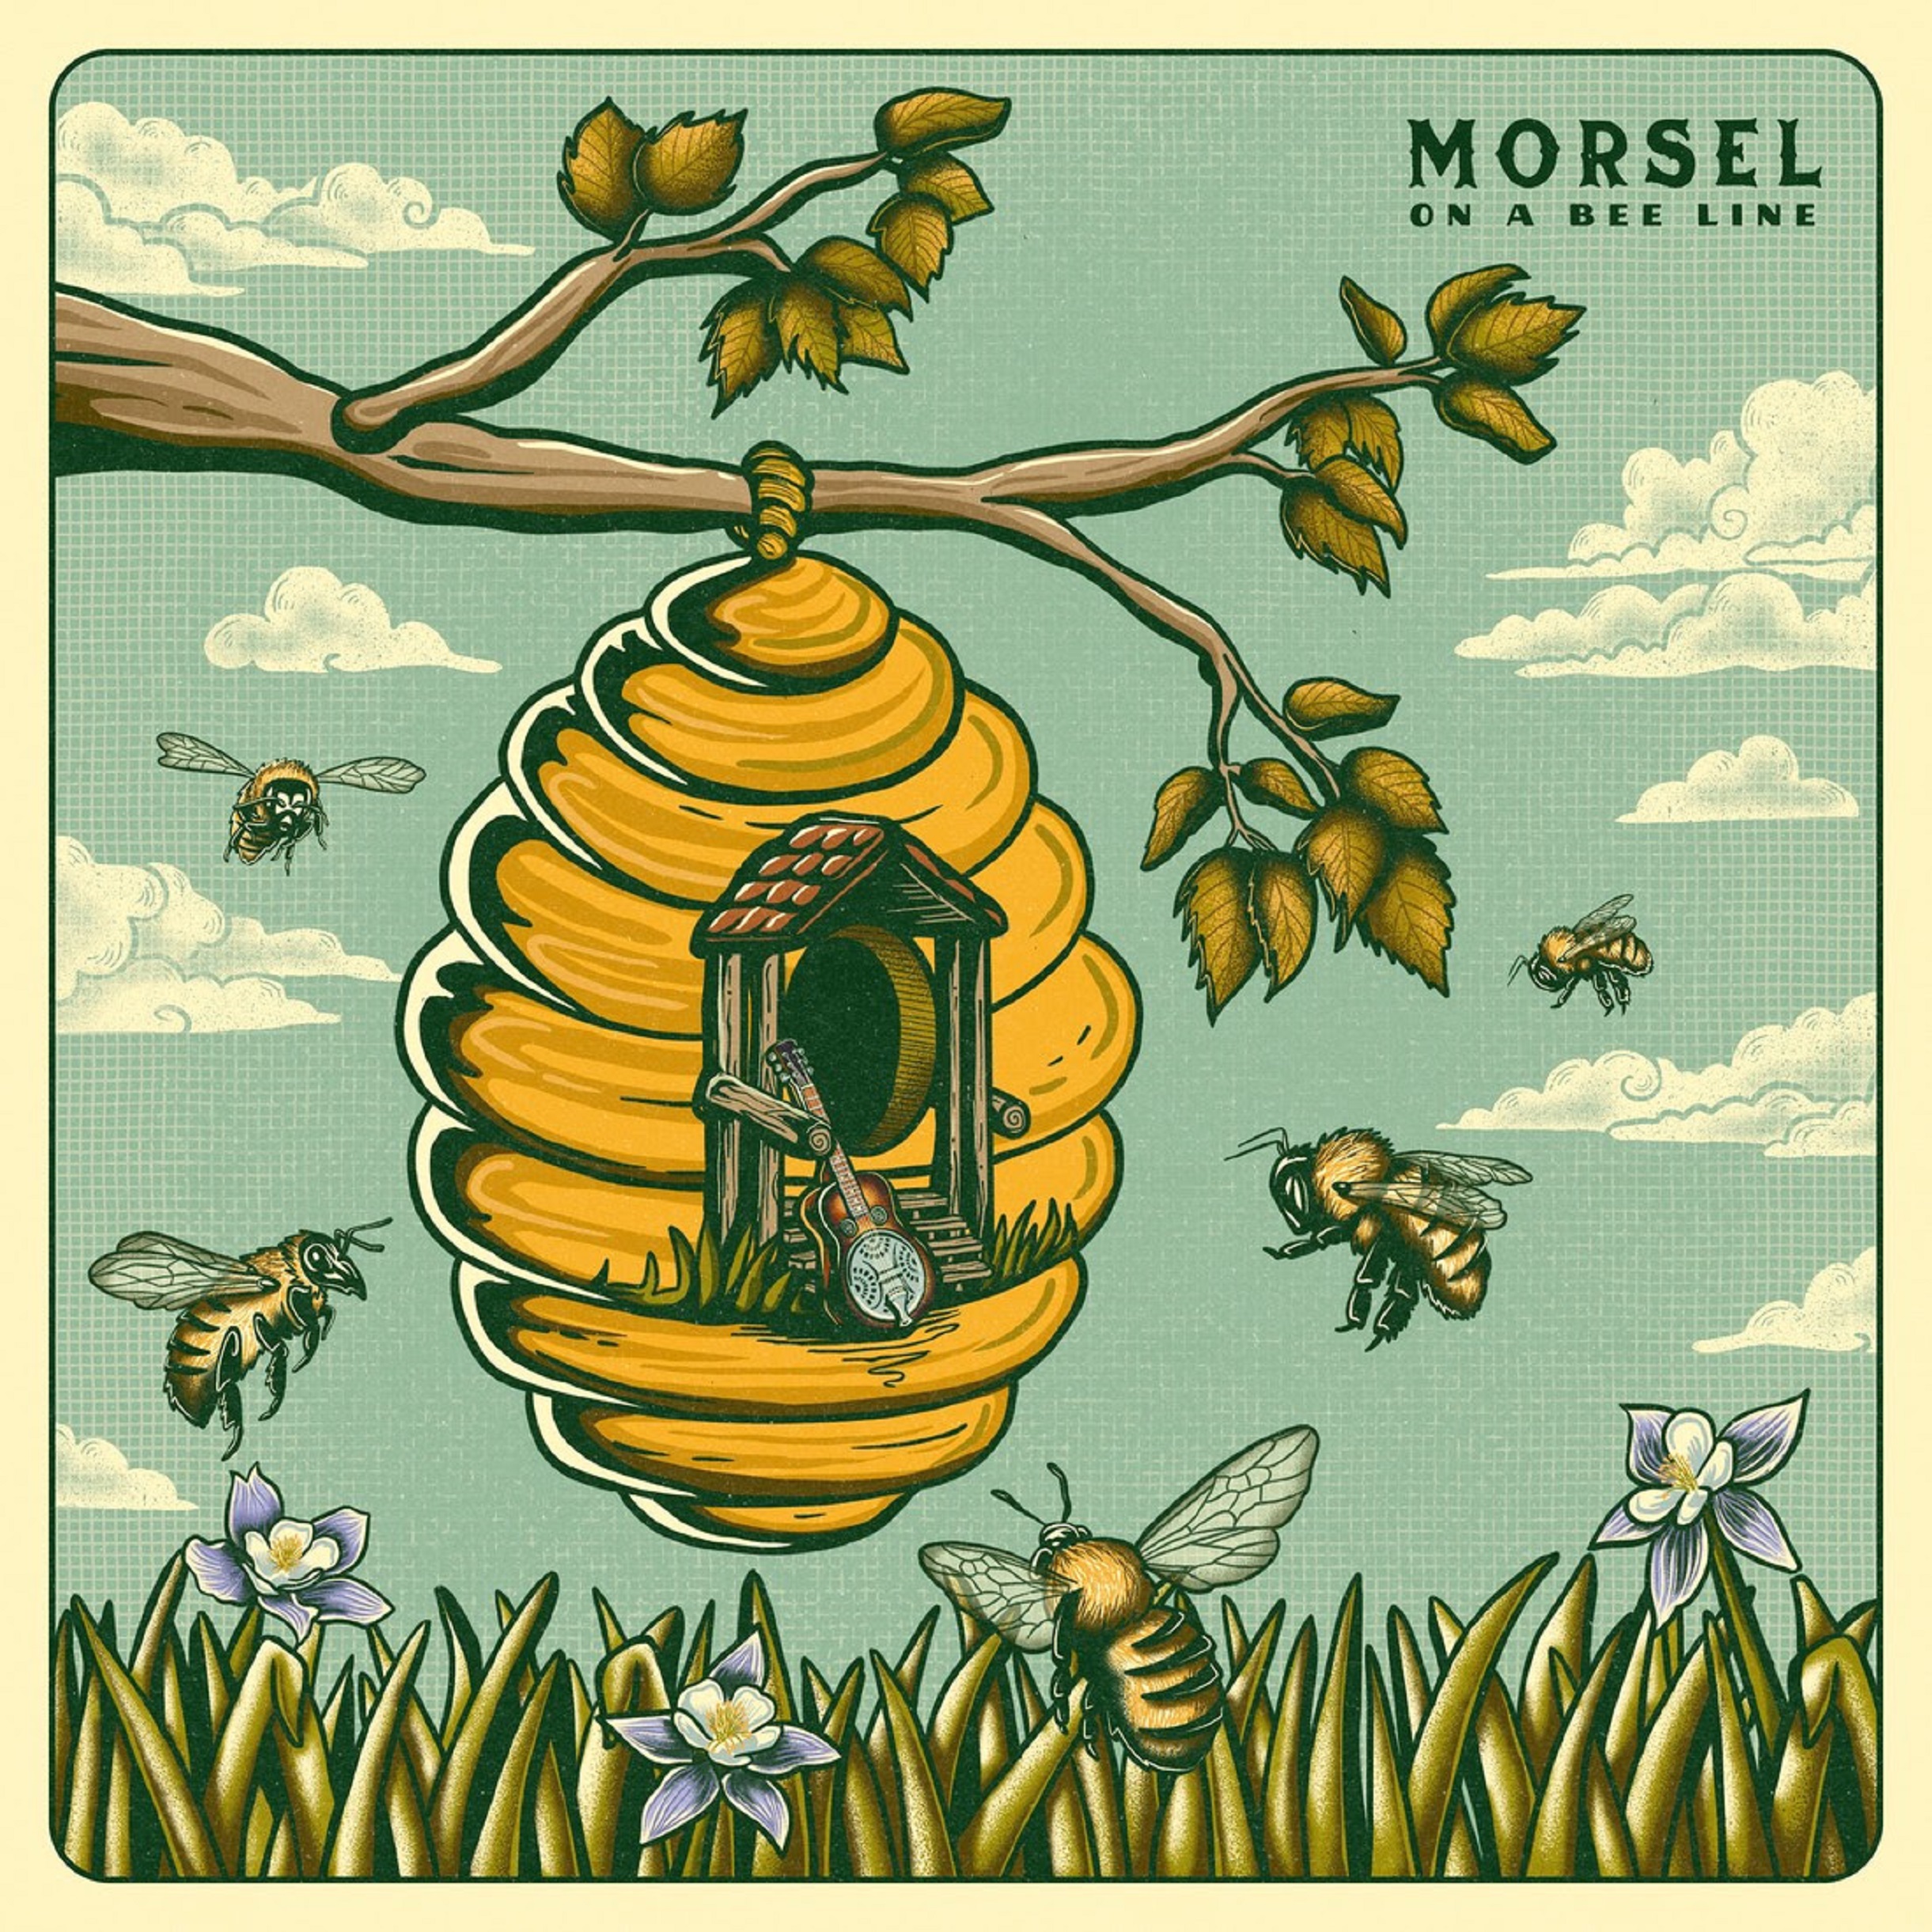 Morsel Release “Rollin’ Down the Road,” The Lead Single Off Their Upcoming Album ‘On a Bee Line’